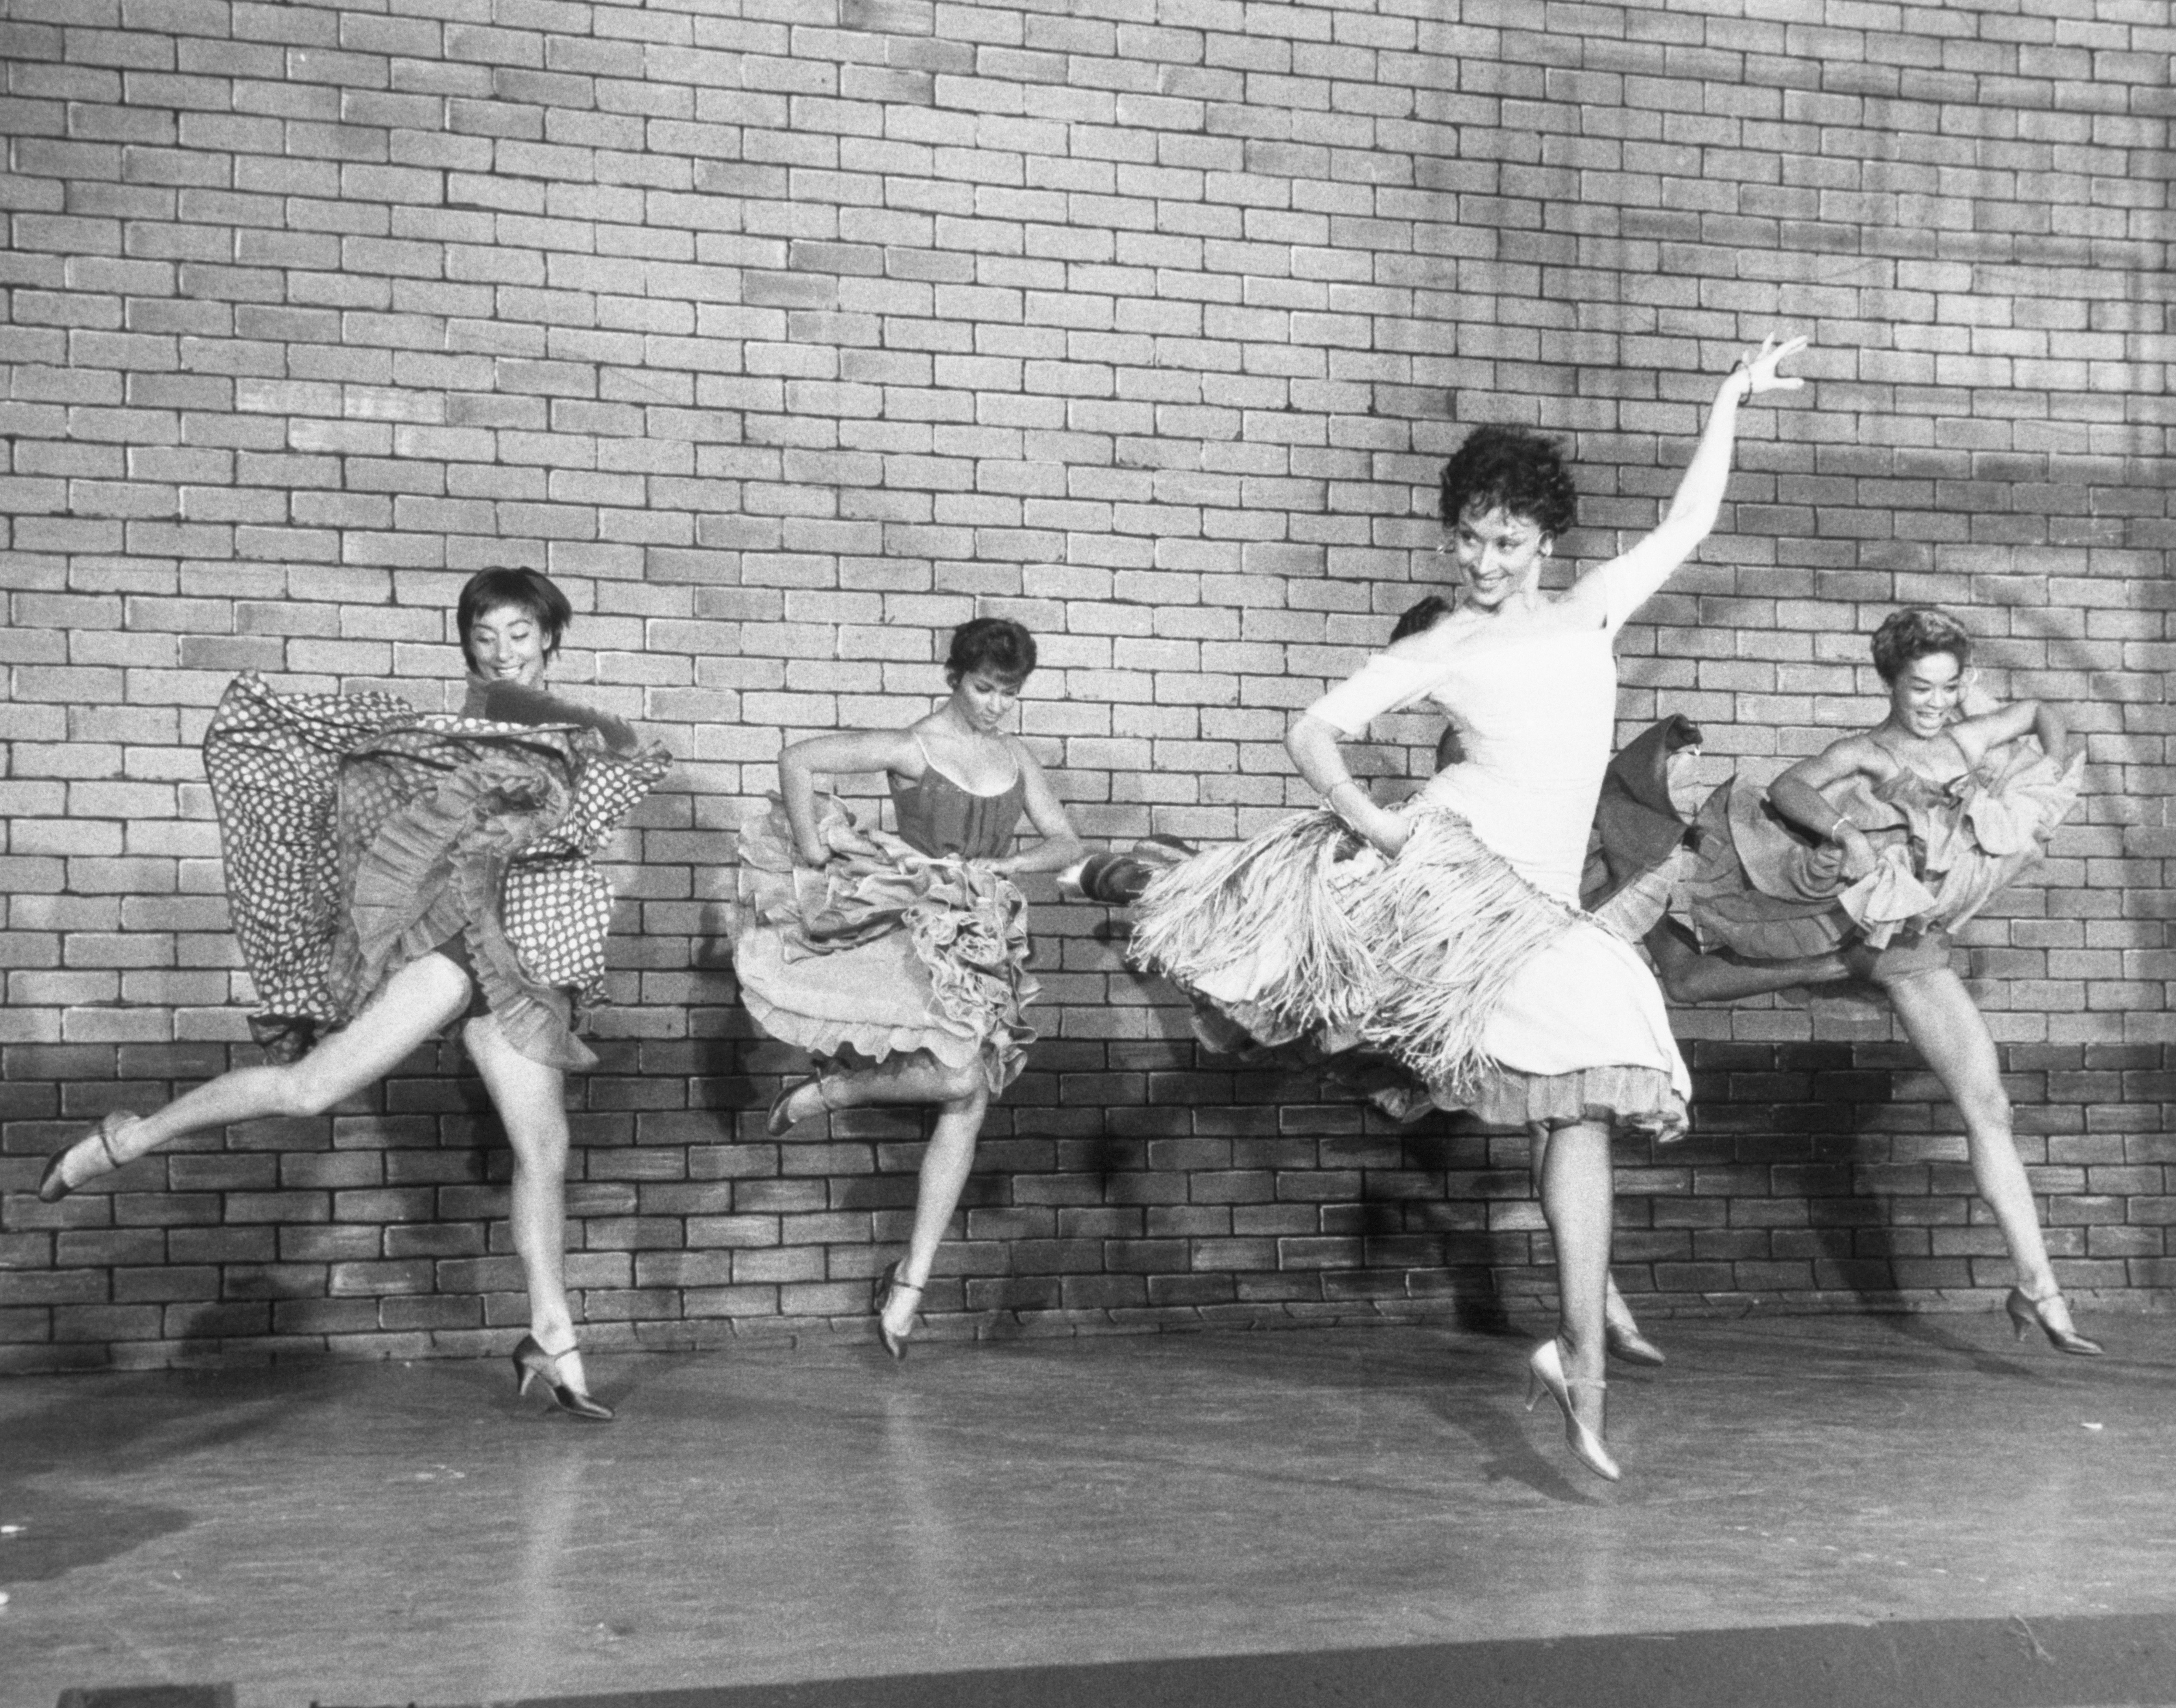 three dancers waving their skirts in the air dance behind Chita Rivera, who is holding one arm up while the other arm is at her waist. She is looking to the side and smiling. 